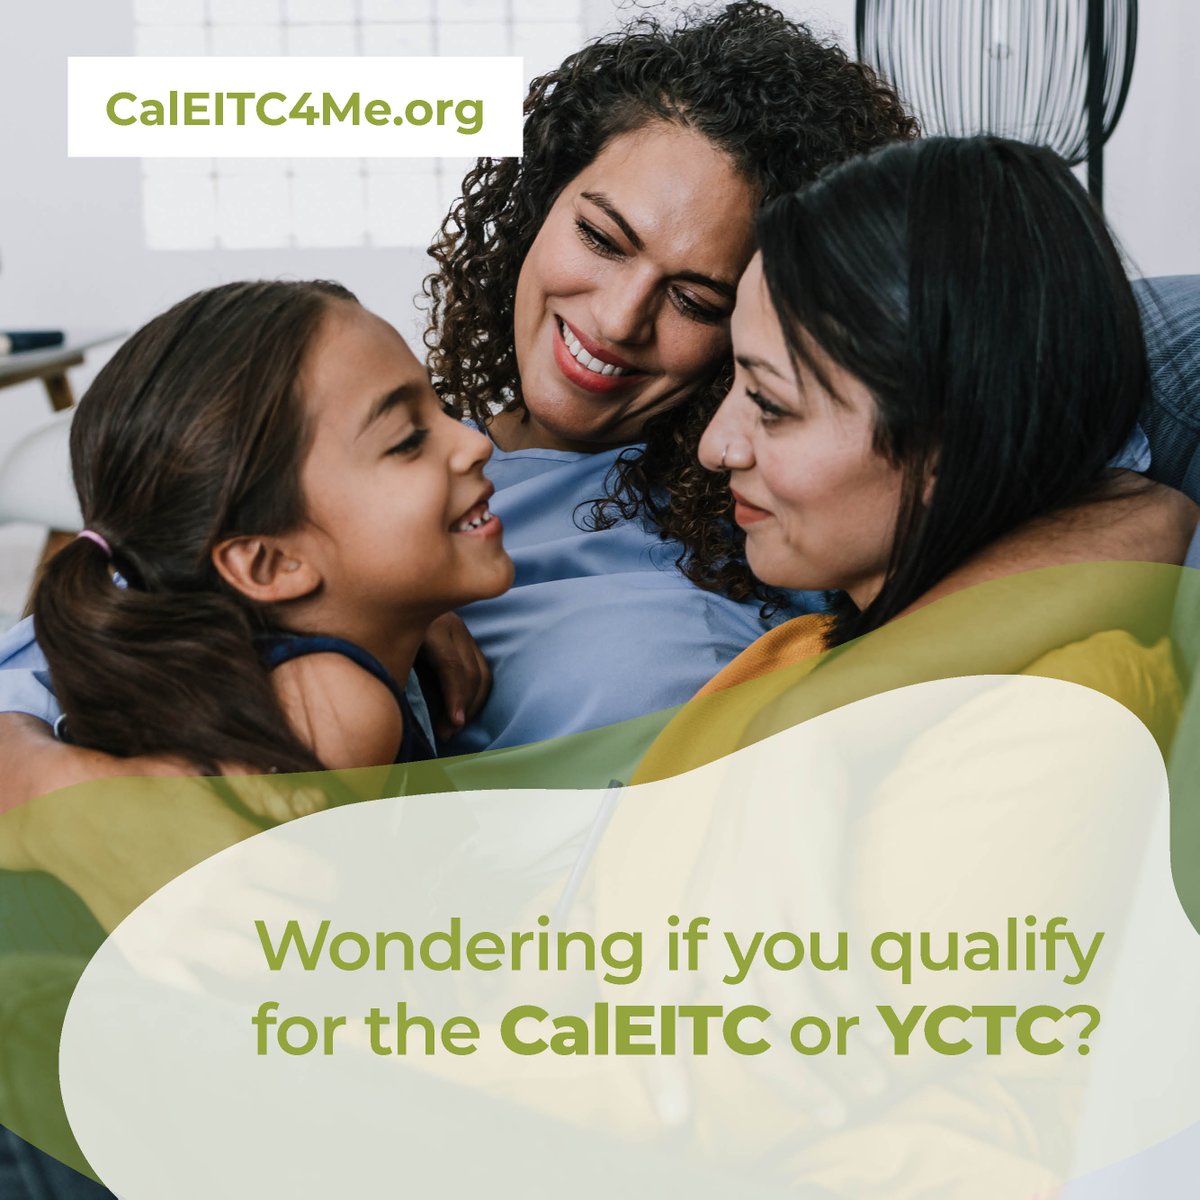 Wondering if you qualify for the #CalEITC or #YCTC? 

Find out fast using this free calculator: CalEITC4Me.org/eitc-calculato…

#CalEITC4Me, @CalEITC4Me